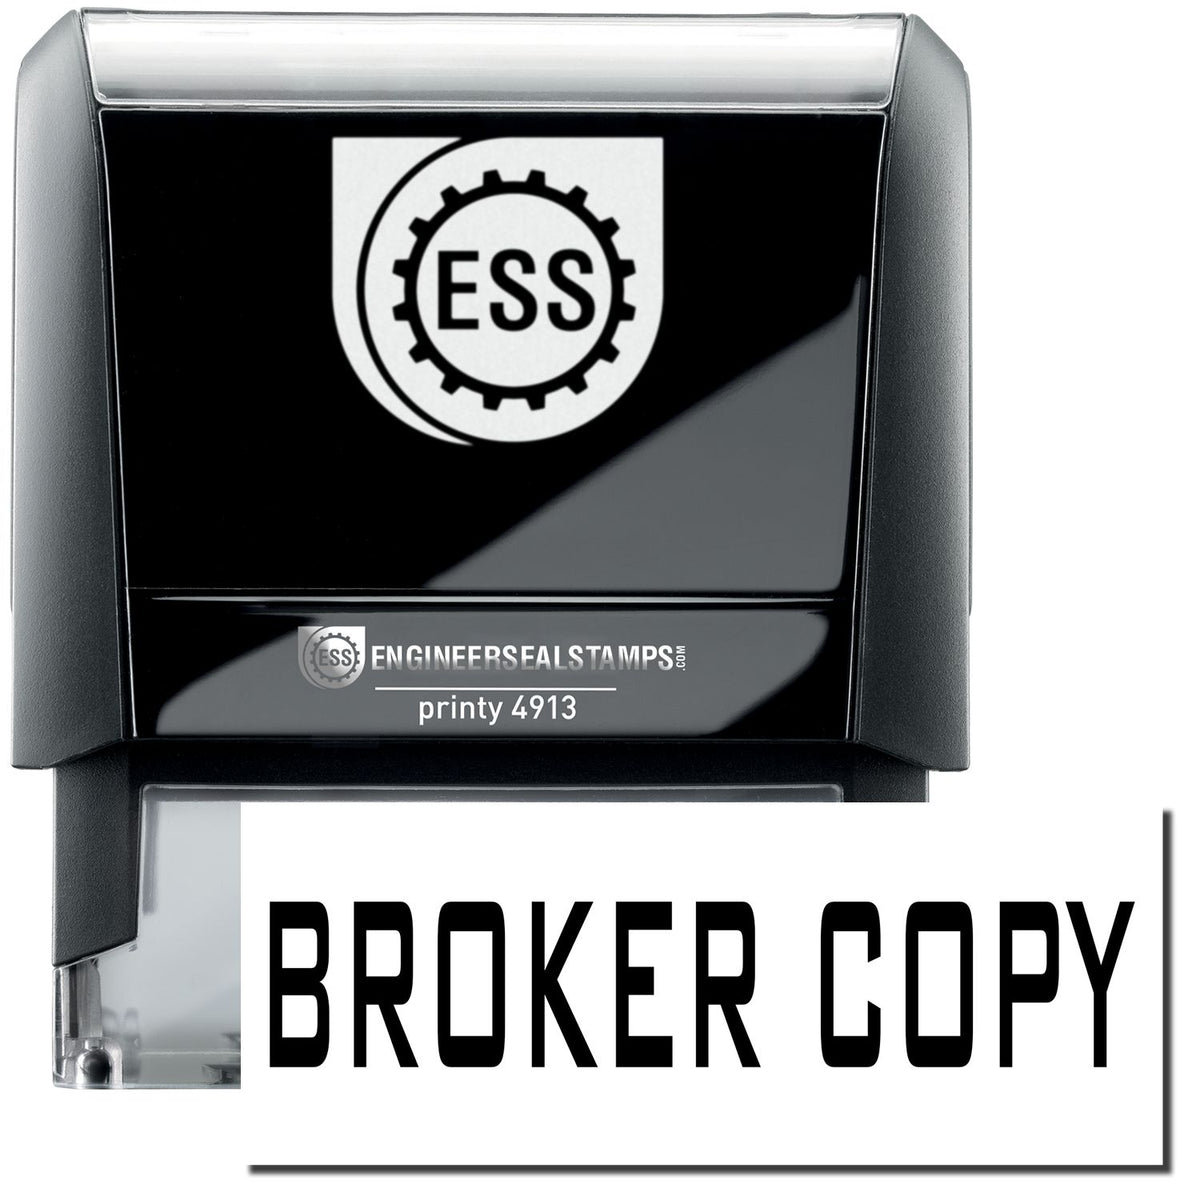 A self-inking stamp with a stamped image showing how the text &quot;BROKER COPY&quot; in a large bold font is displayed by it.